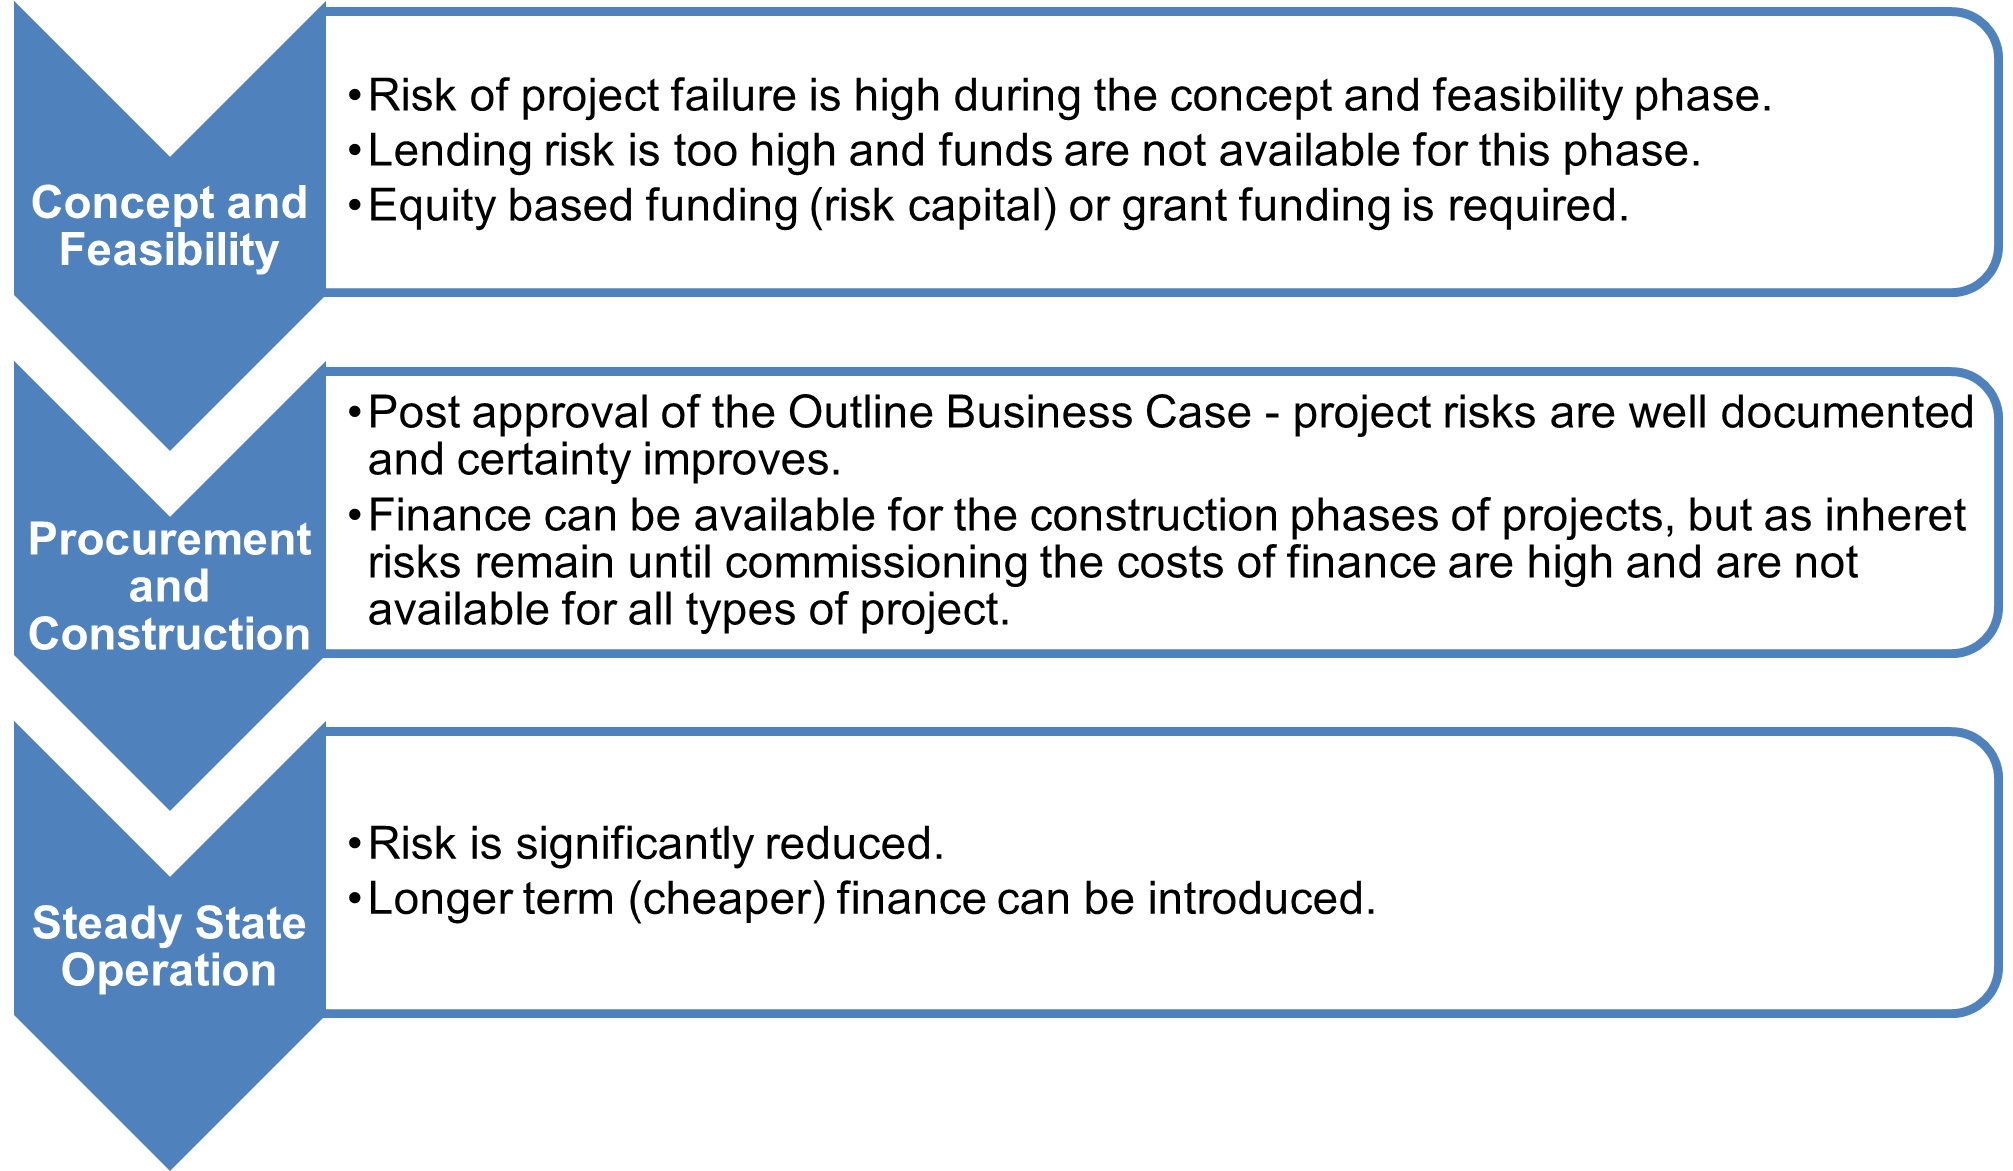  Finance type and availability through project phases